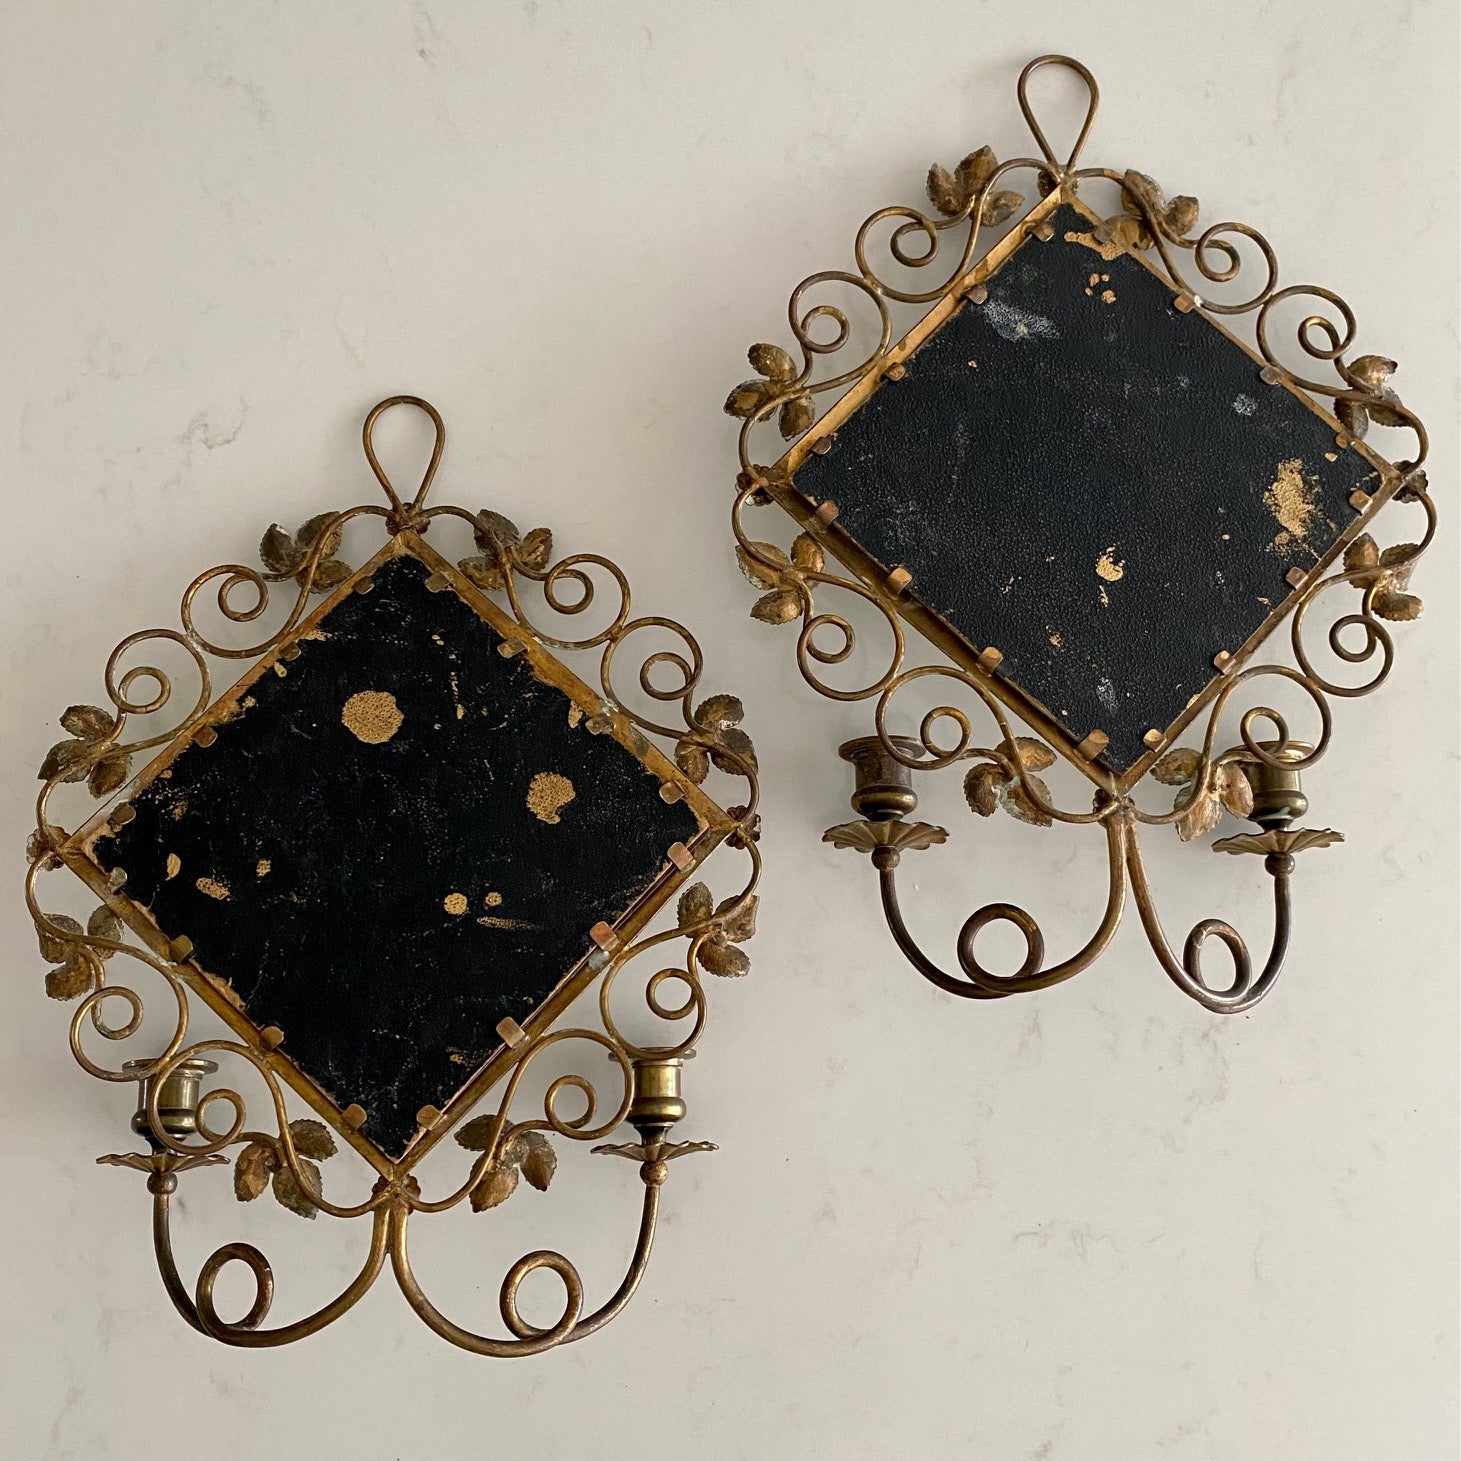 M24 PAIR ANTIQUE BRASS MIRROR WALL CANDLE SCONCES